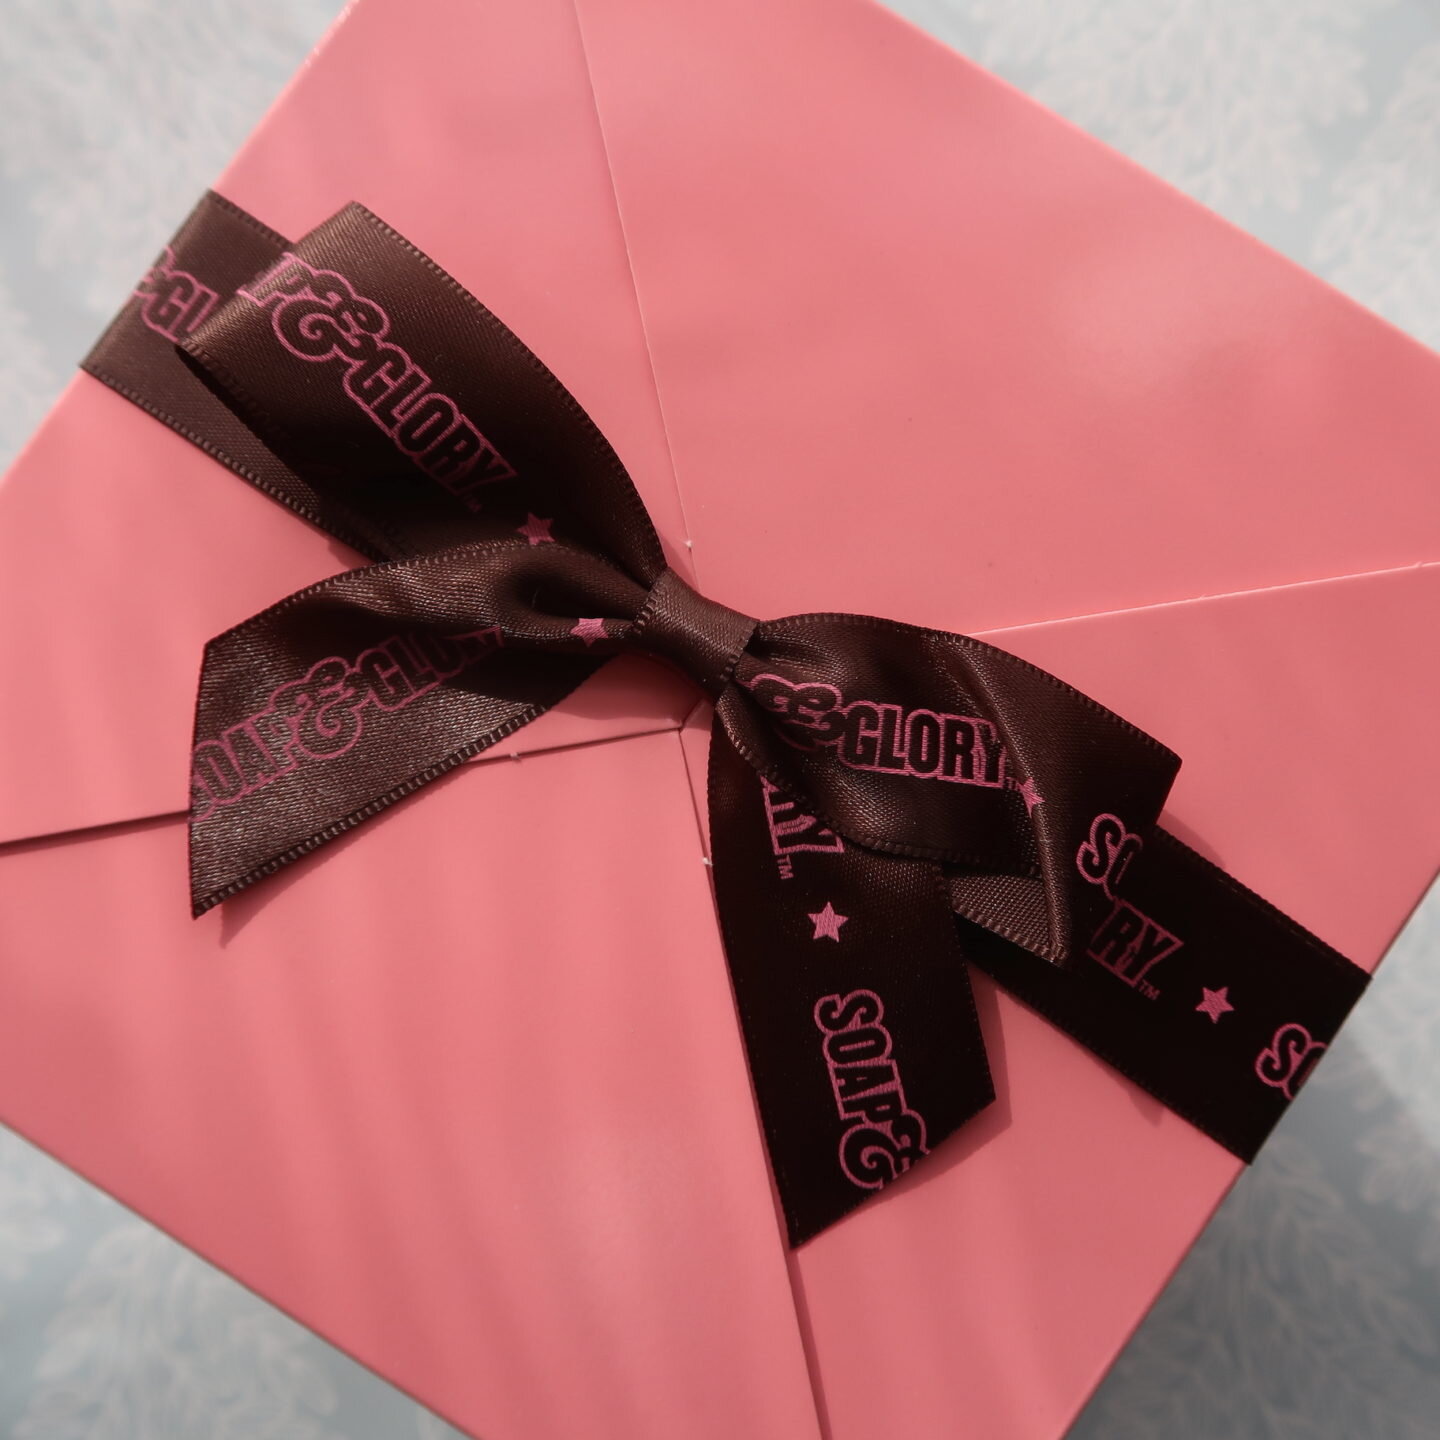 SOAP AND GLORY MOTHERS DAY